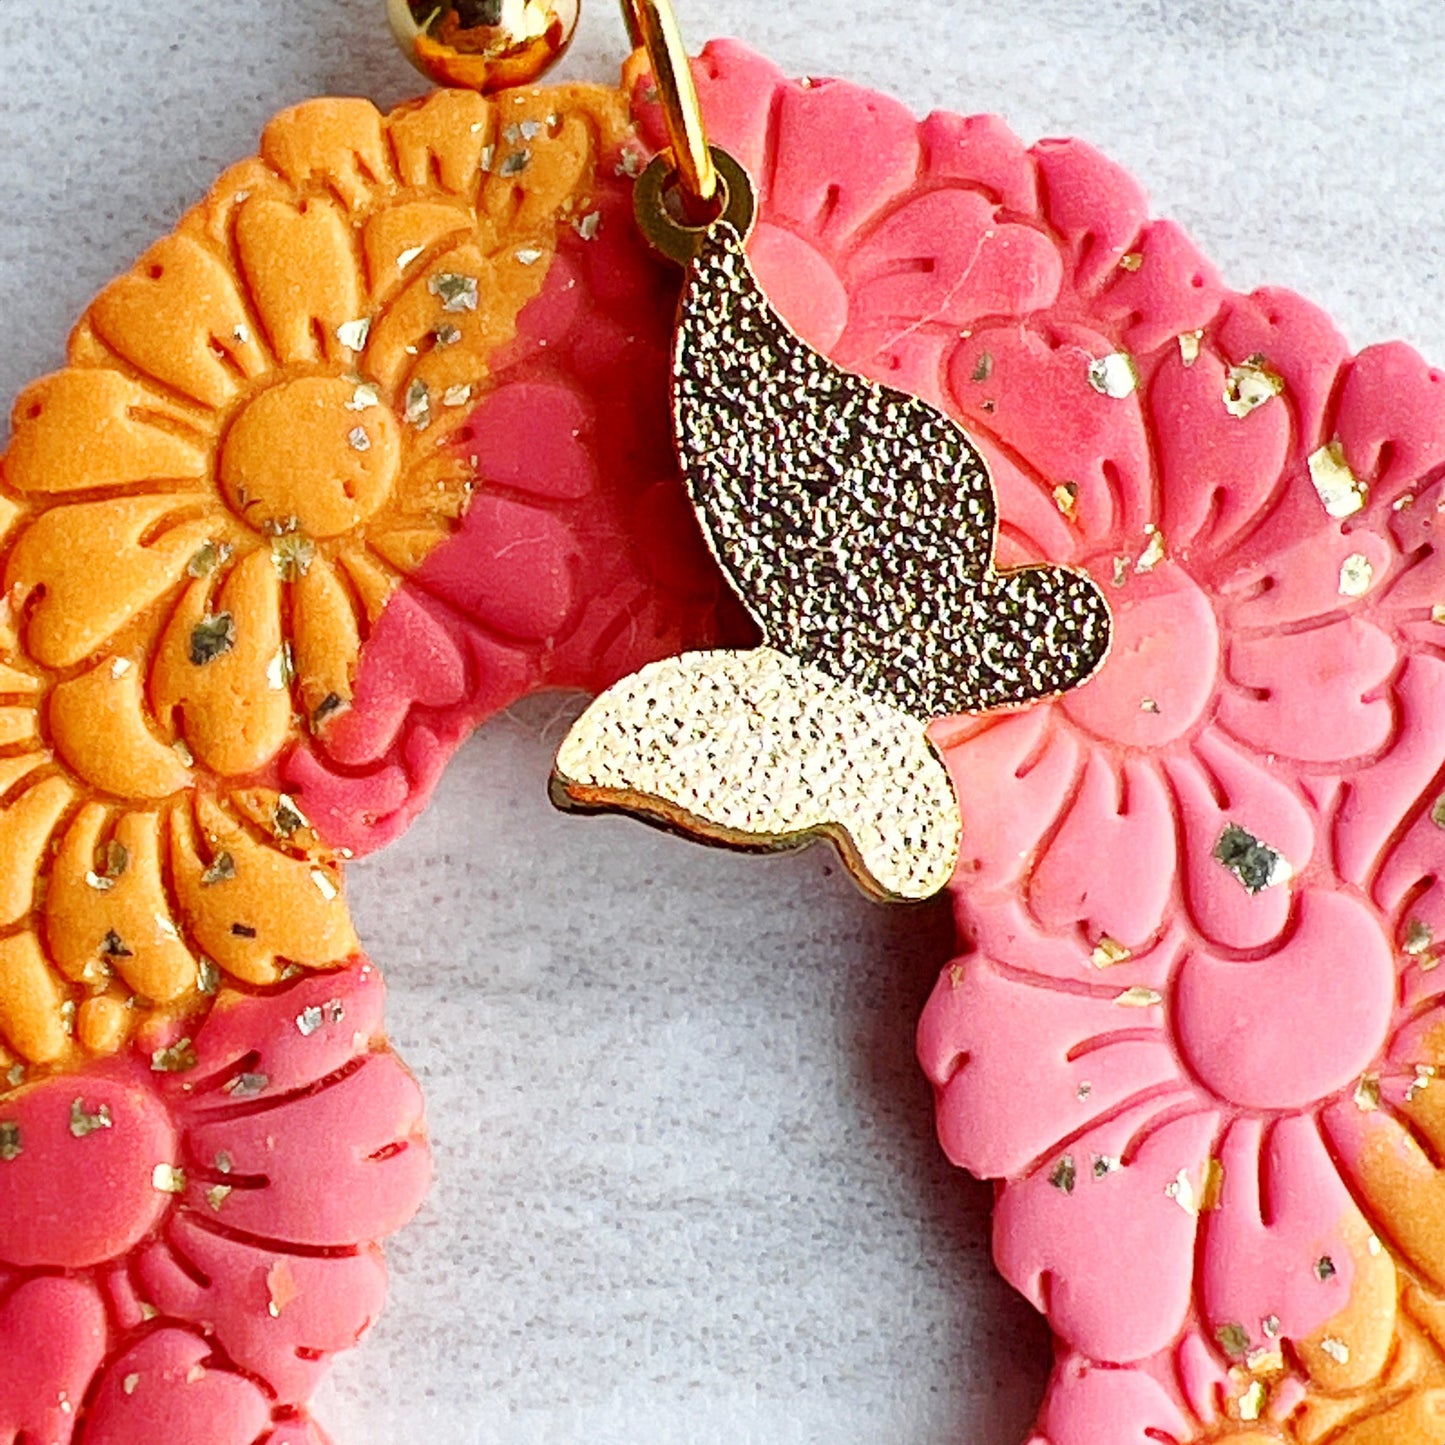 Earrings Talia - Sunset Floral Embossed Arches with Gold Butterflies